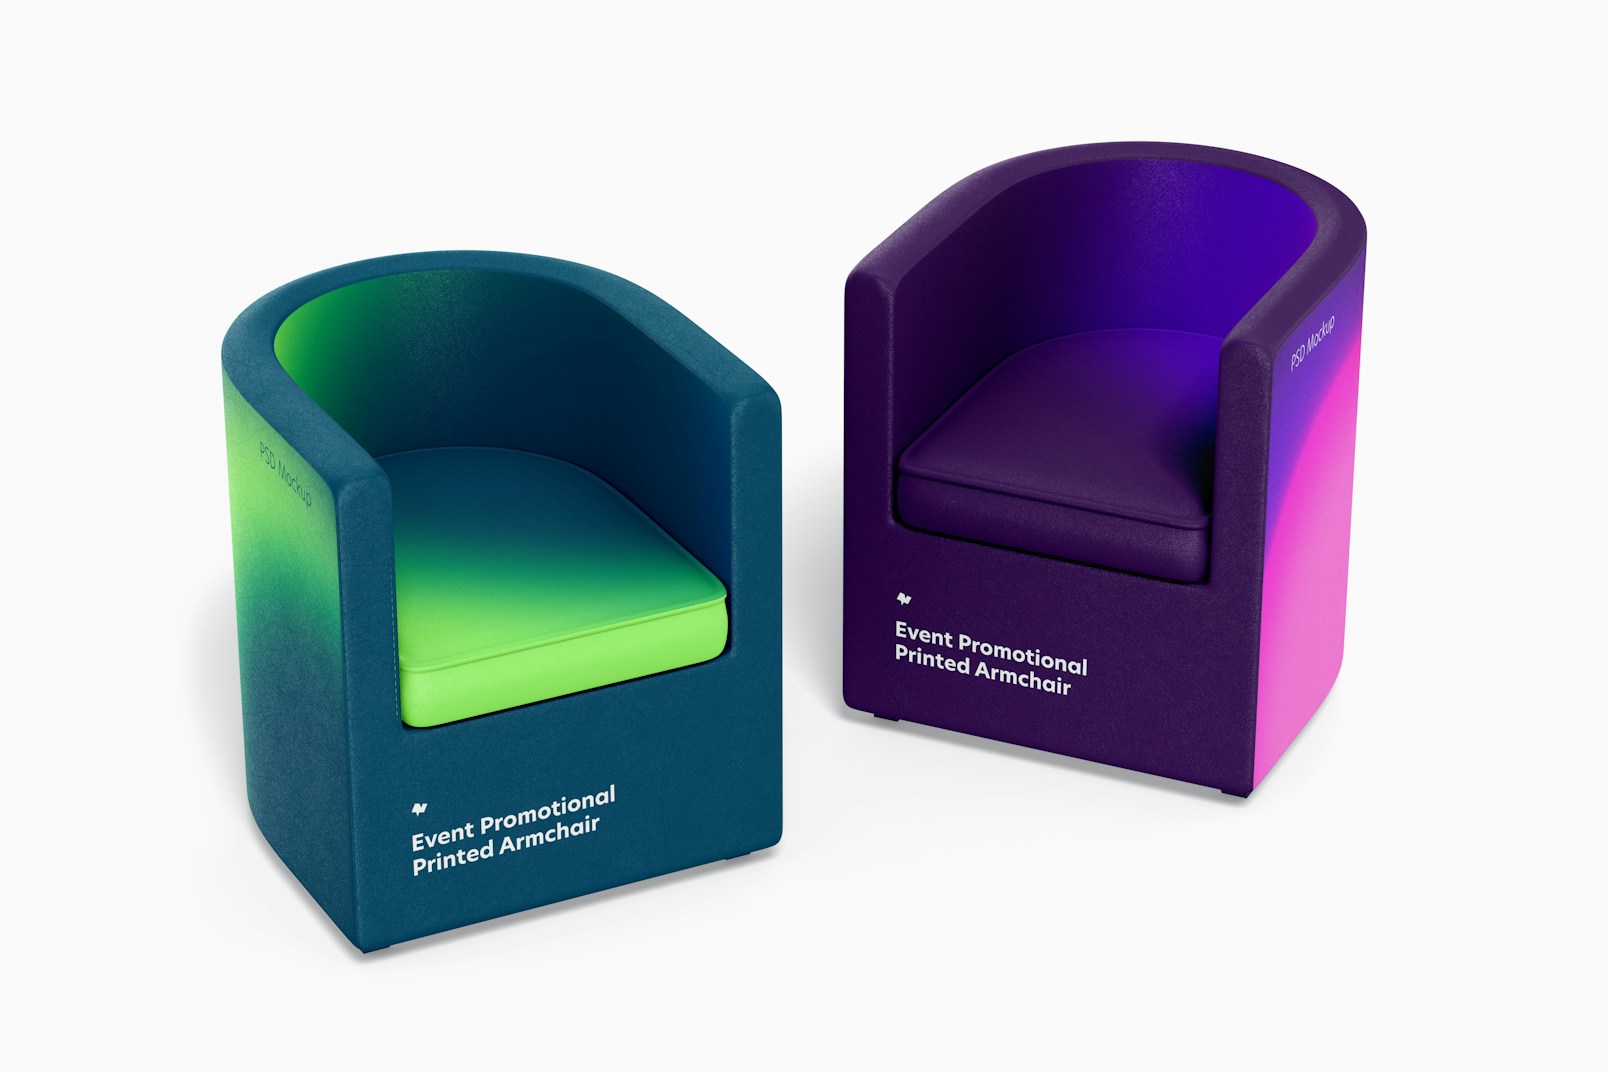 Event Promotional Printed Armchairs Mockup, Perspective